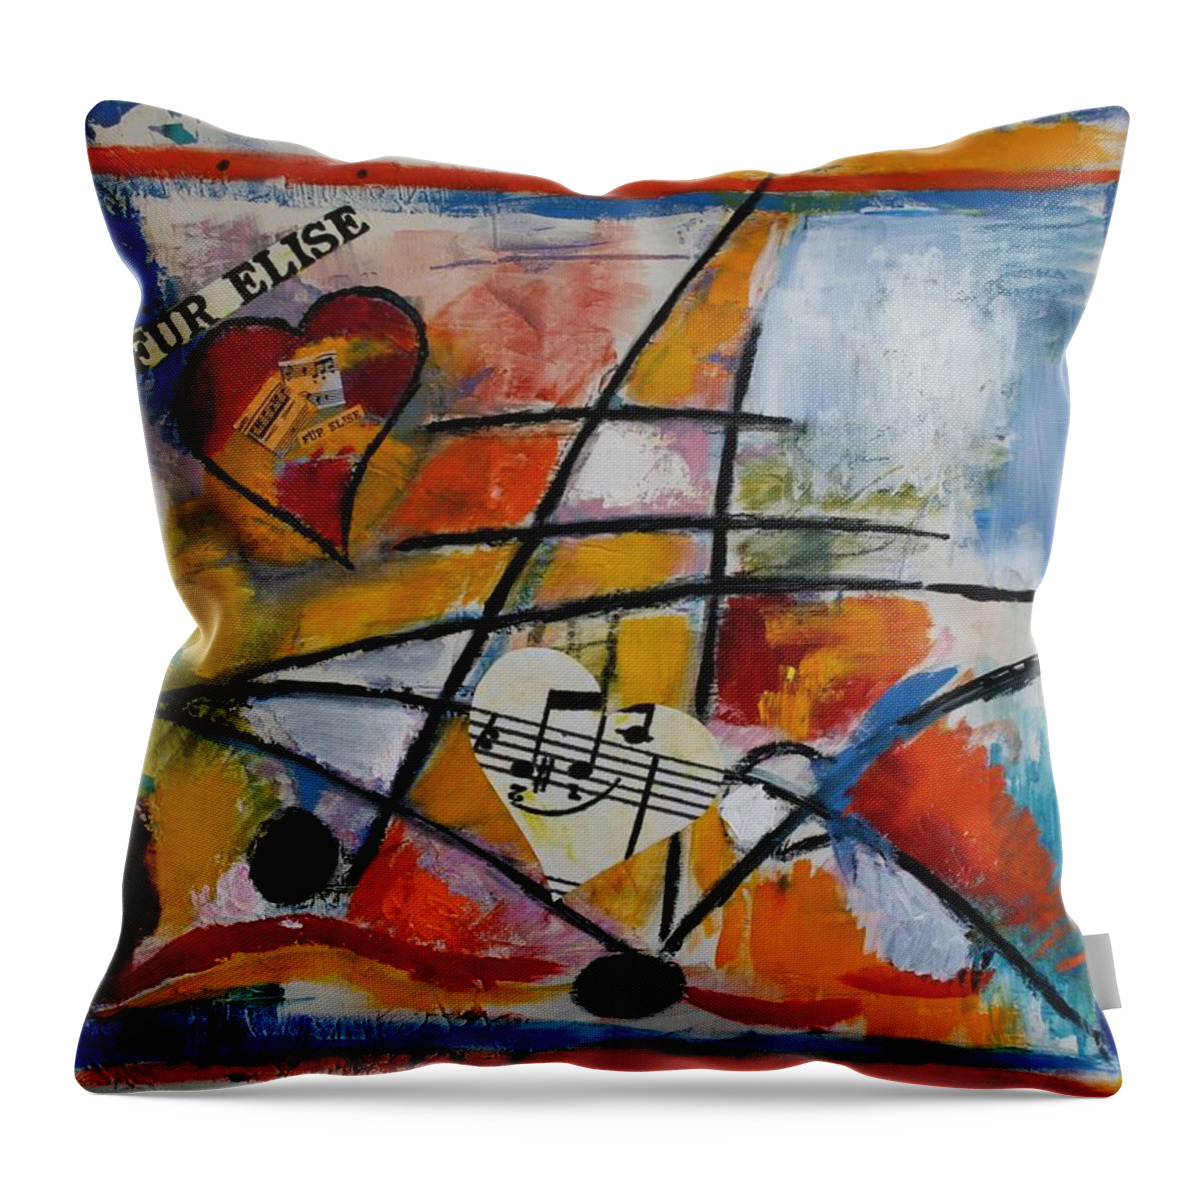 Abstract Throw Pillow featuring the painting Fuer Elise by Karin Eisermann